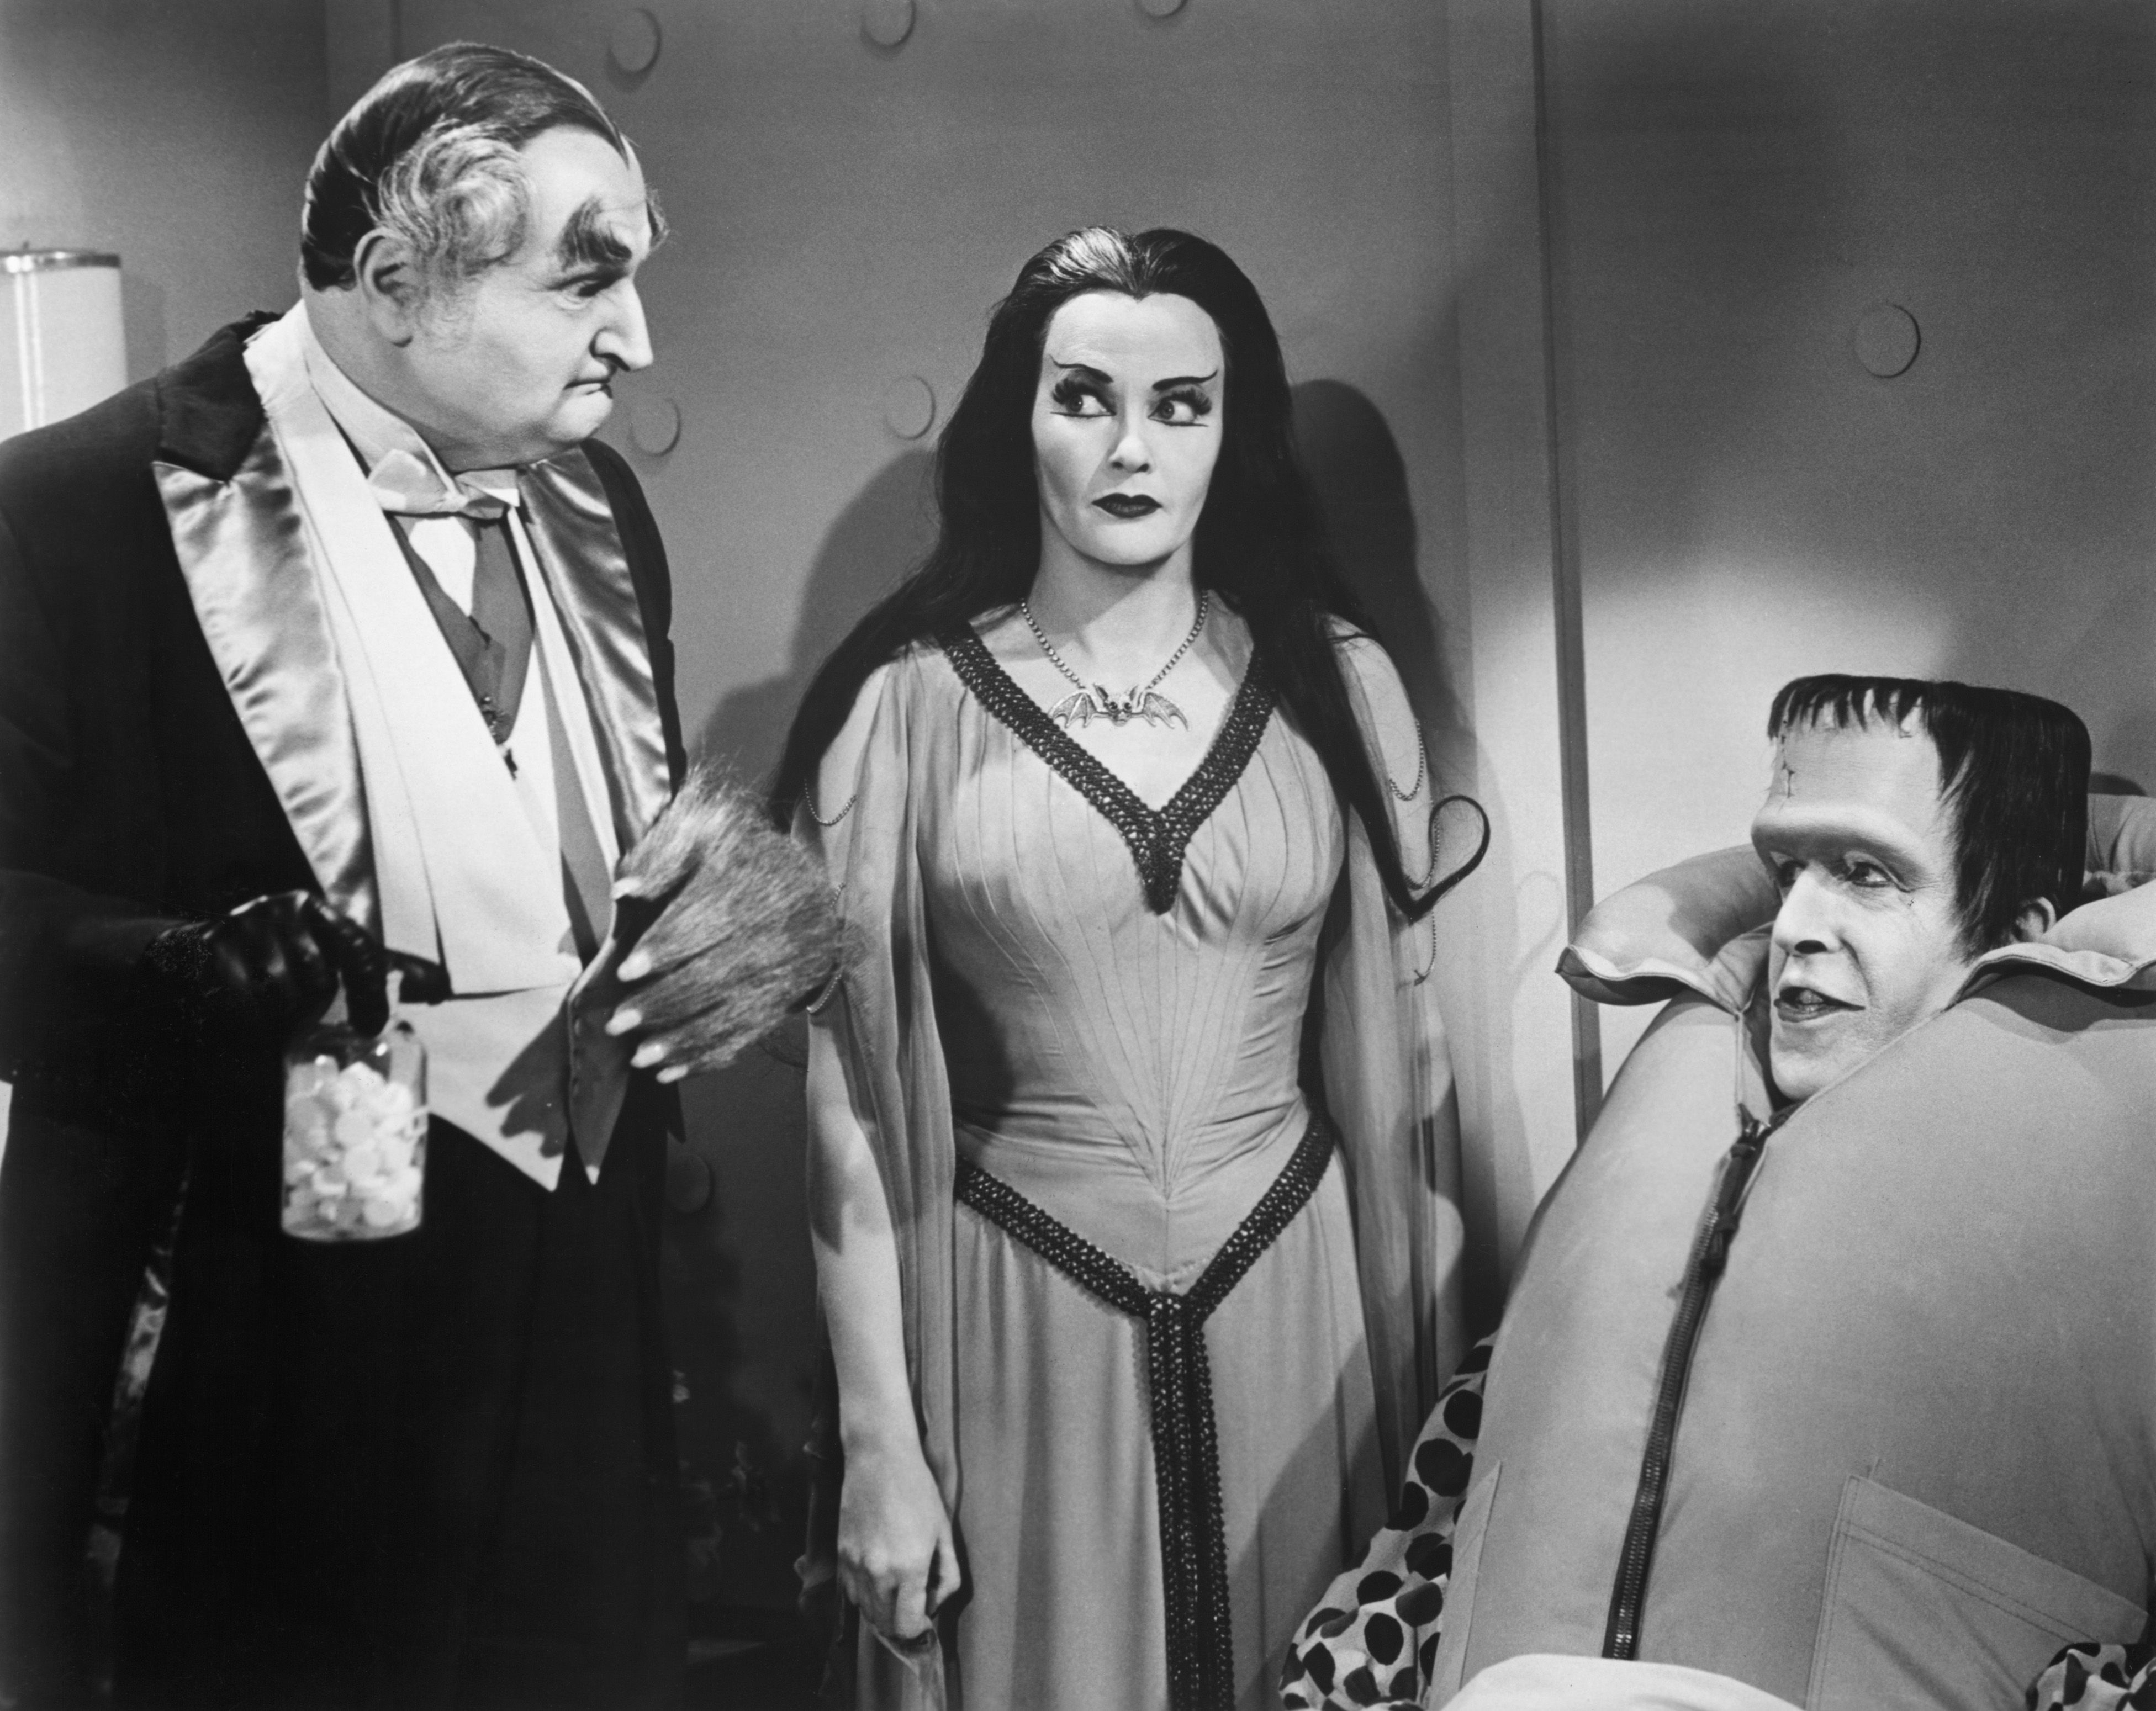 The Munsters: TV Series, Movies, Spin Offs And Merchandise. TV